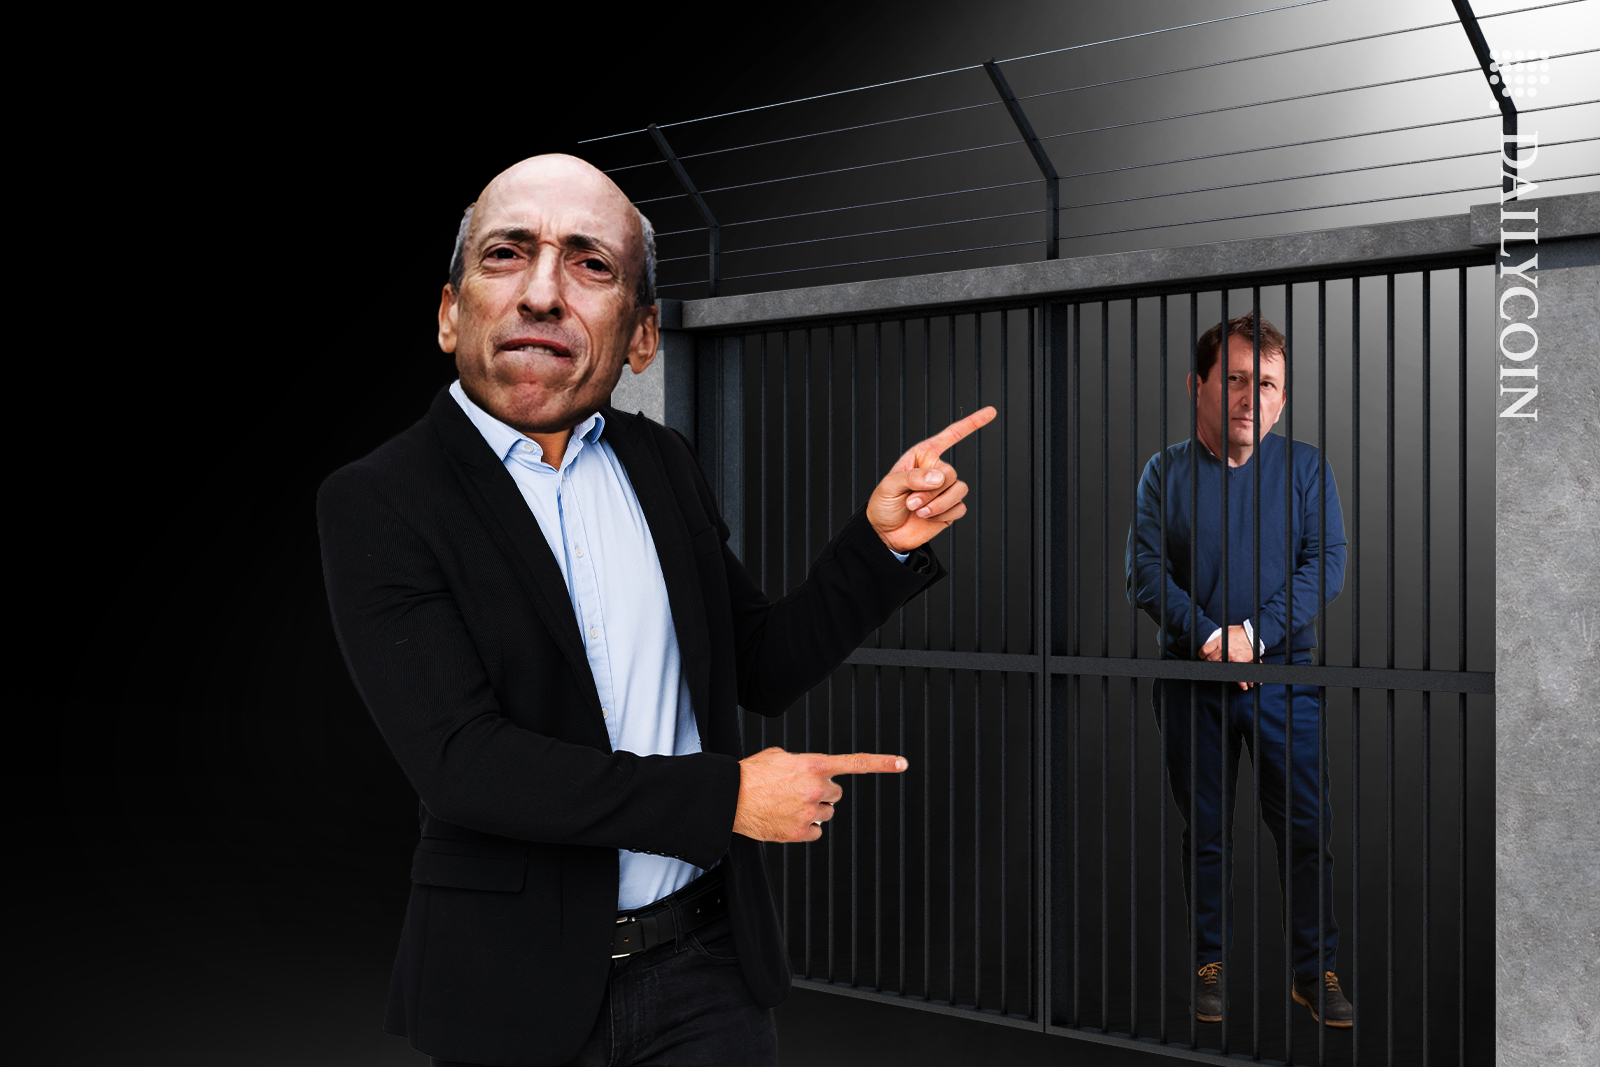 Gary Gensler pointing and being angry at Alex Mashinsky, as Alex is behind bars.